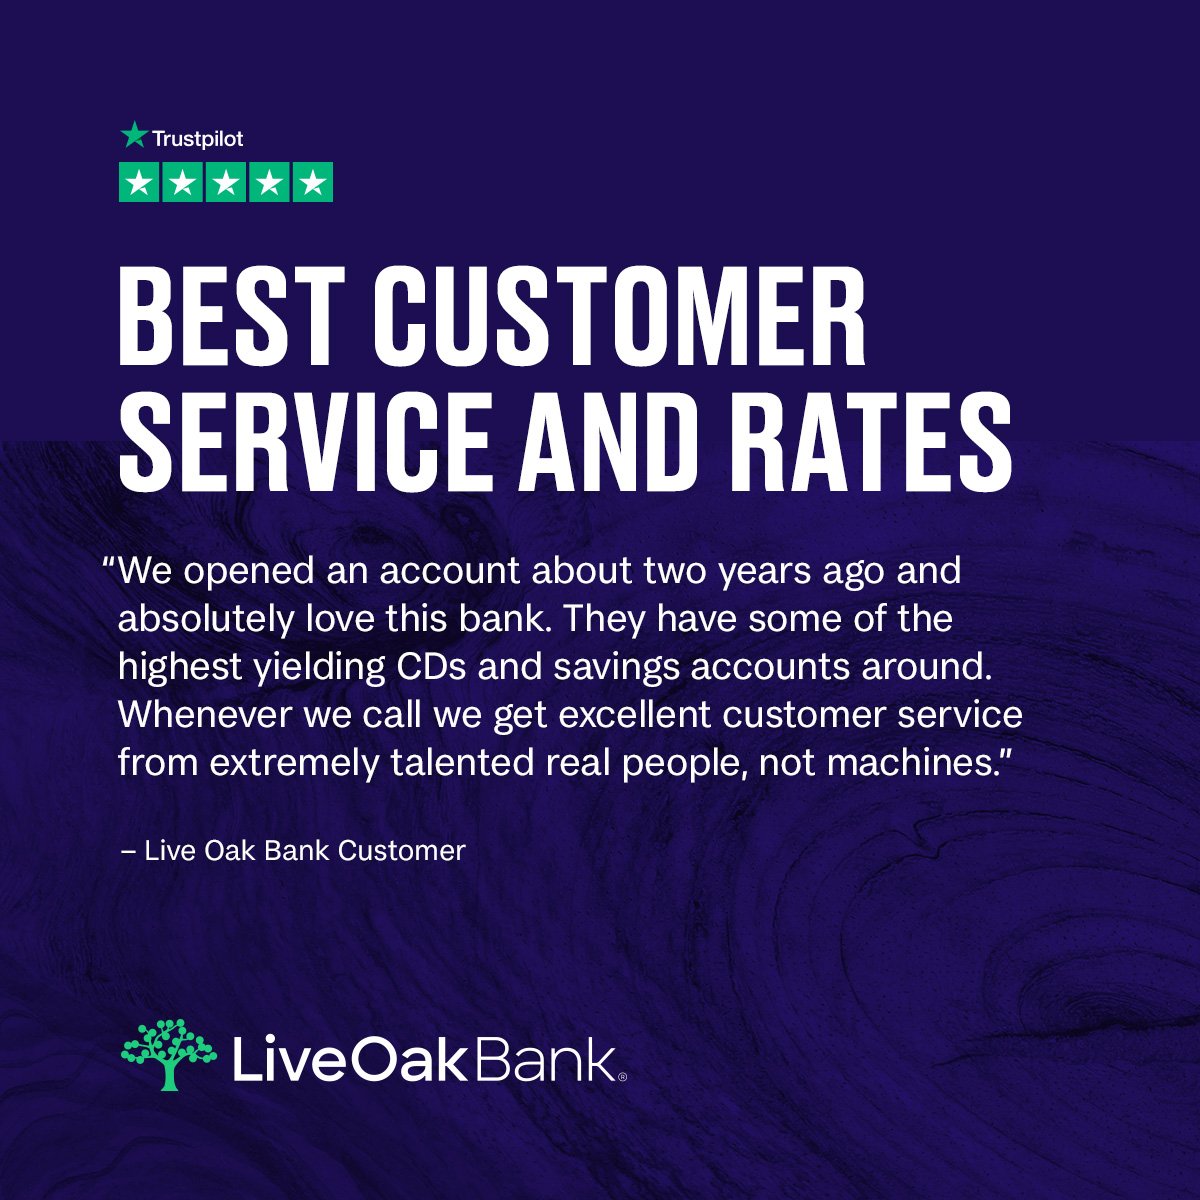 'We opened an account about two years ago and absolutely love this bank. Whenever we call we get excellent customer service from extremely talented real people, not machines. Thank you to all the awesome people at Live Oak Bank.' - Live Oak Bank Customer Member FDIC.